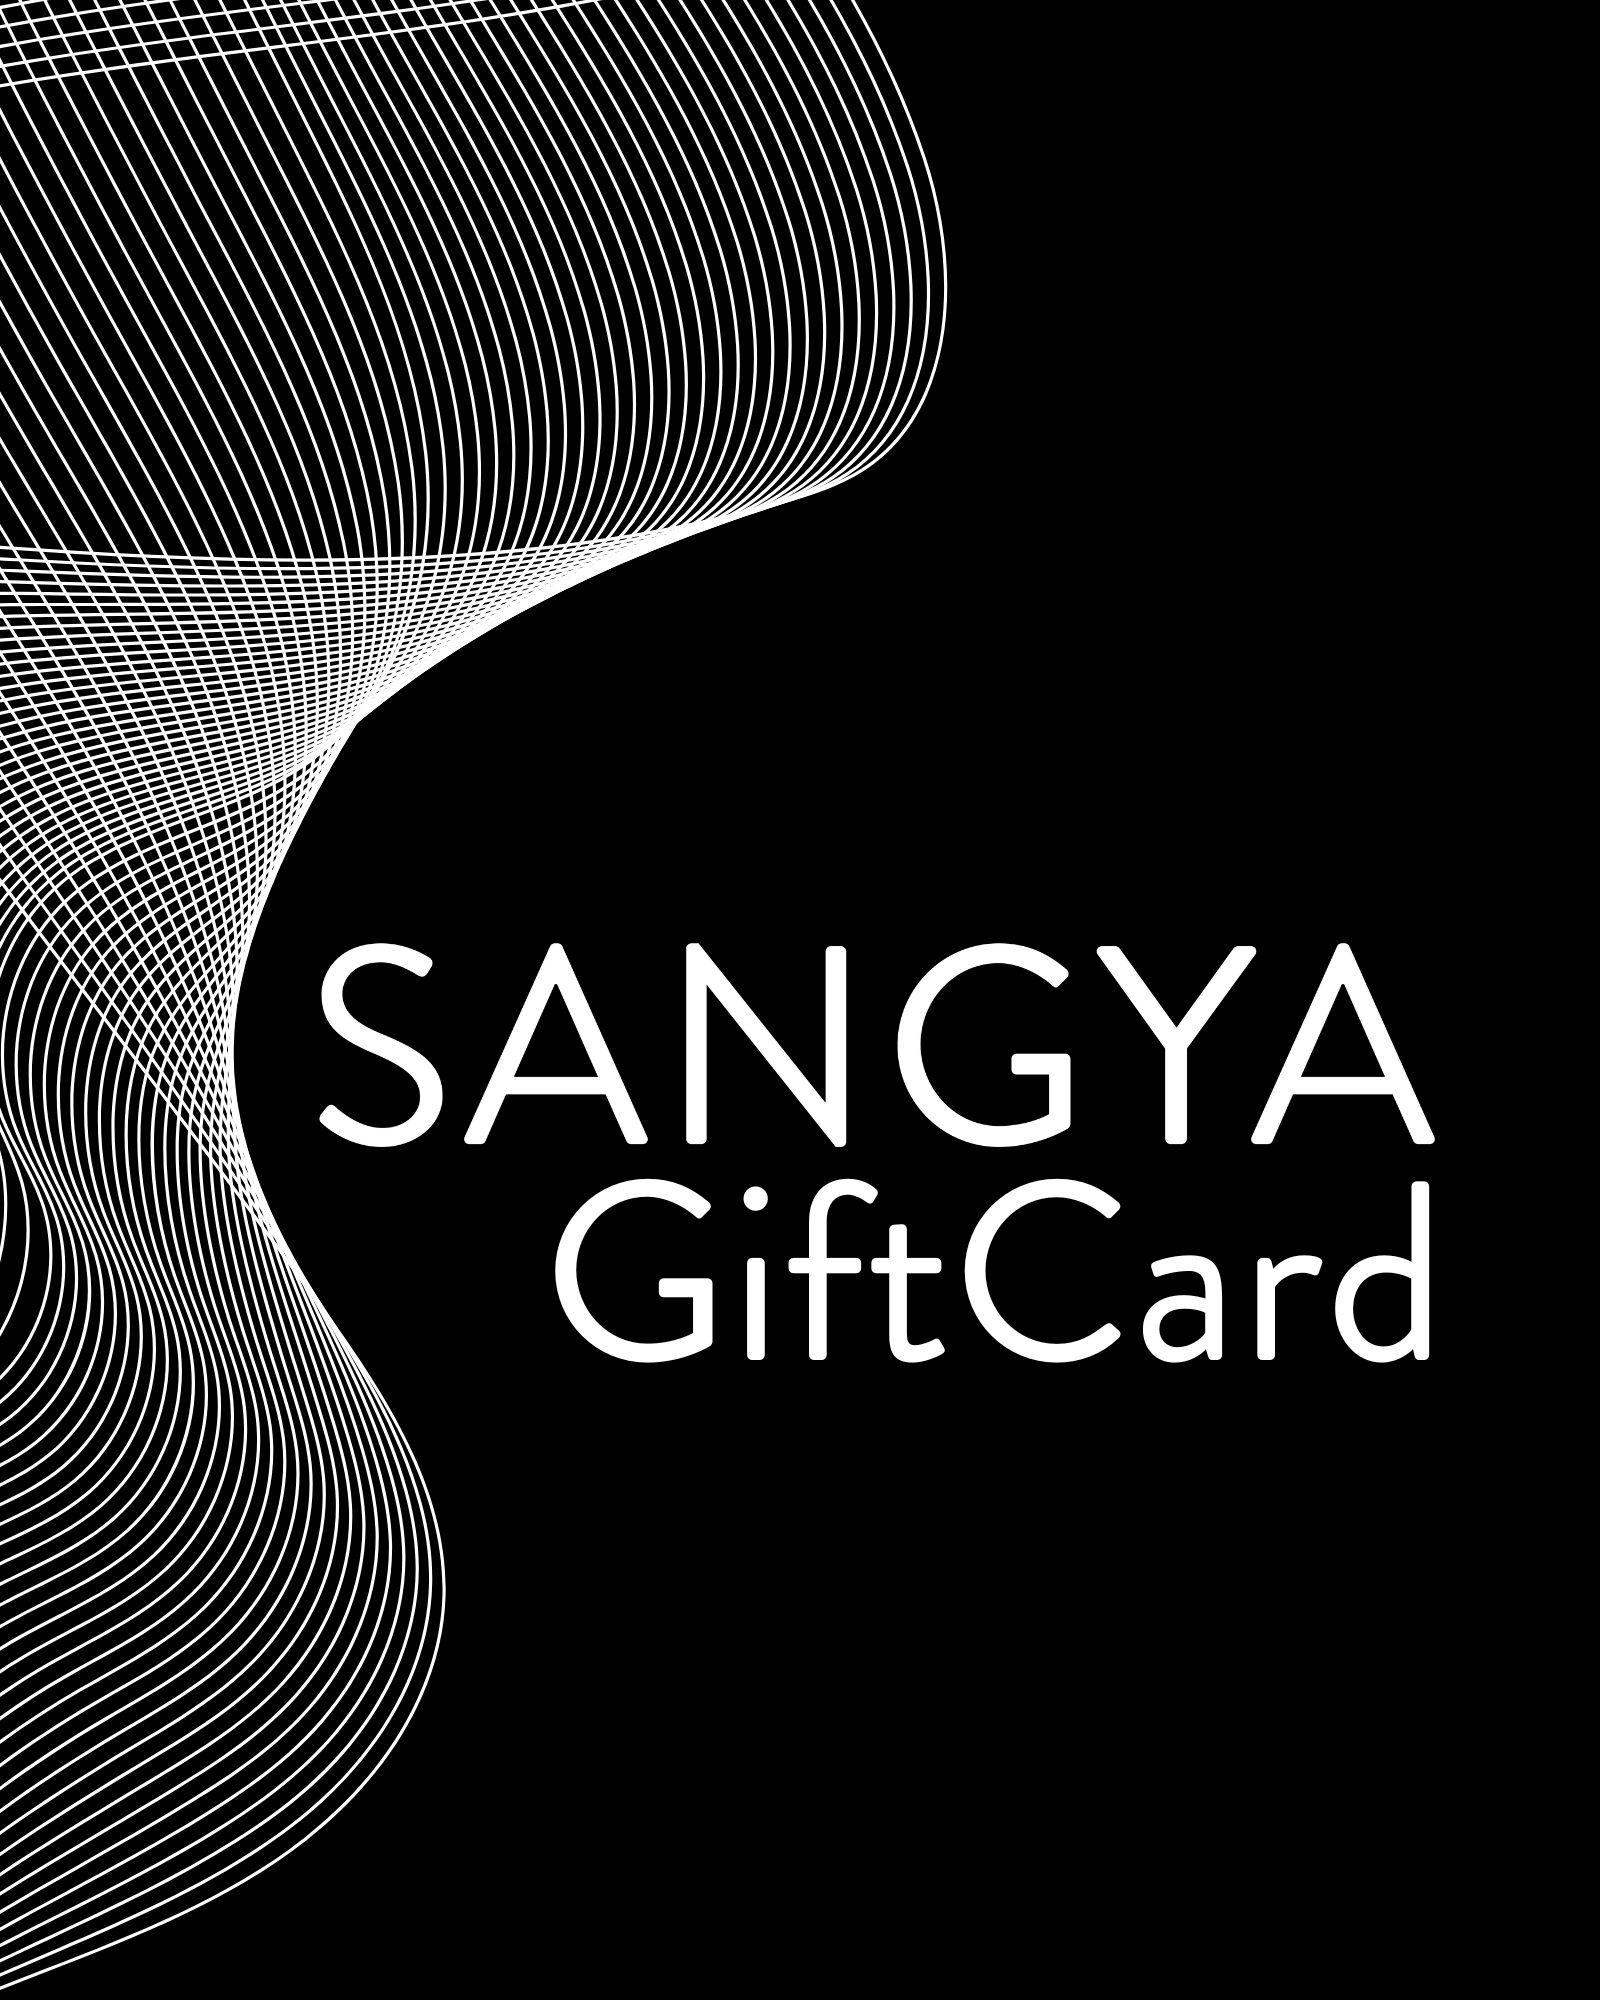 Sangya Gift Card - Gifting ideas for friends and family -sangyaproject